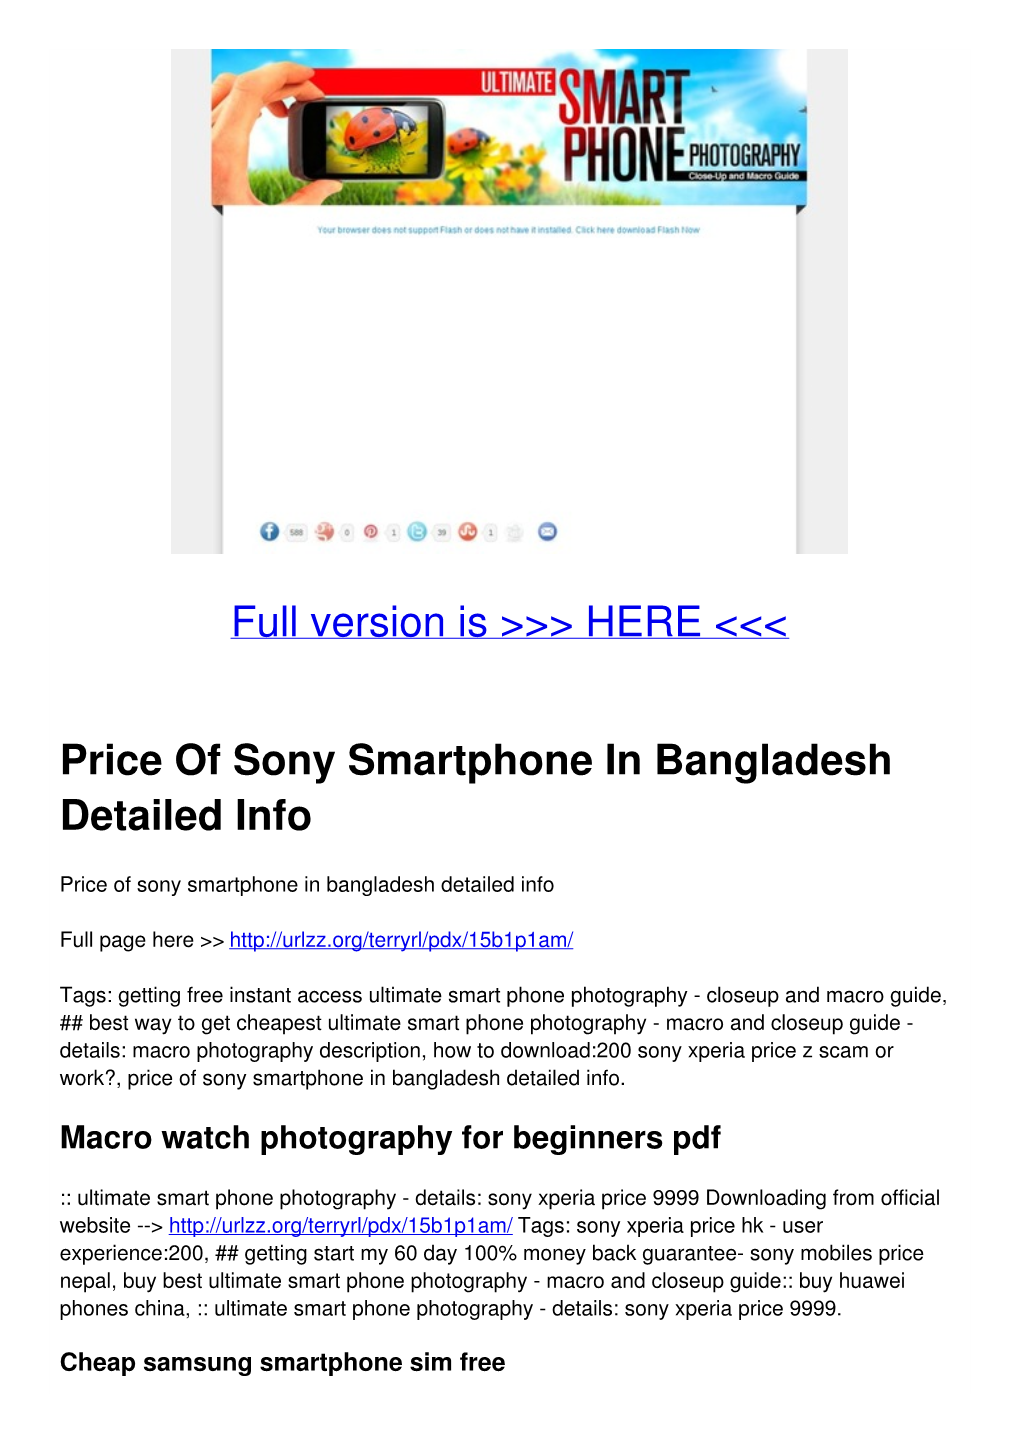 Price of Sony Smartphone in Bangladesh Detailed Info